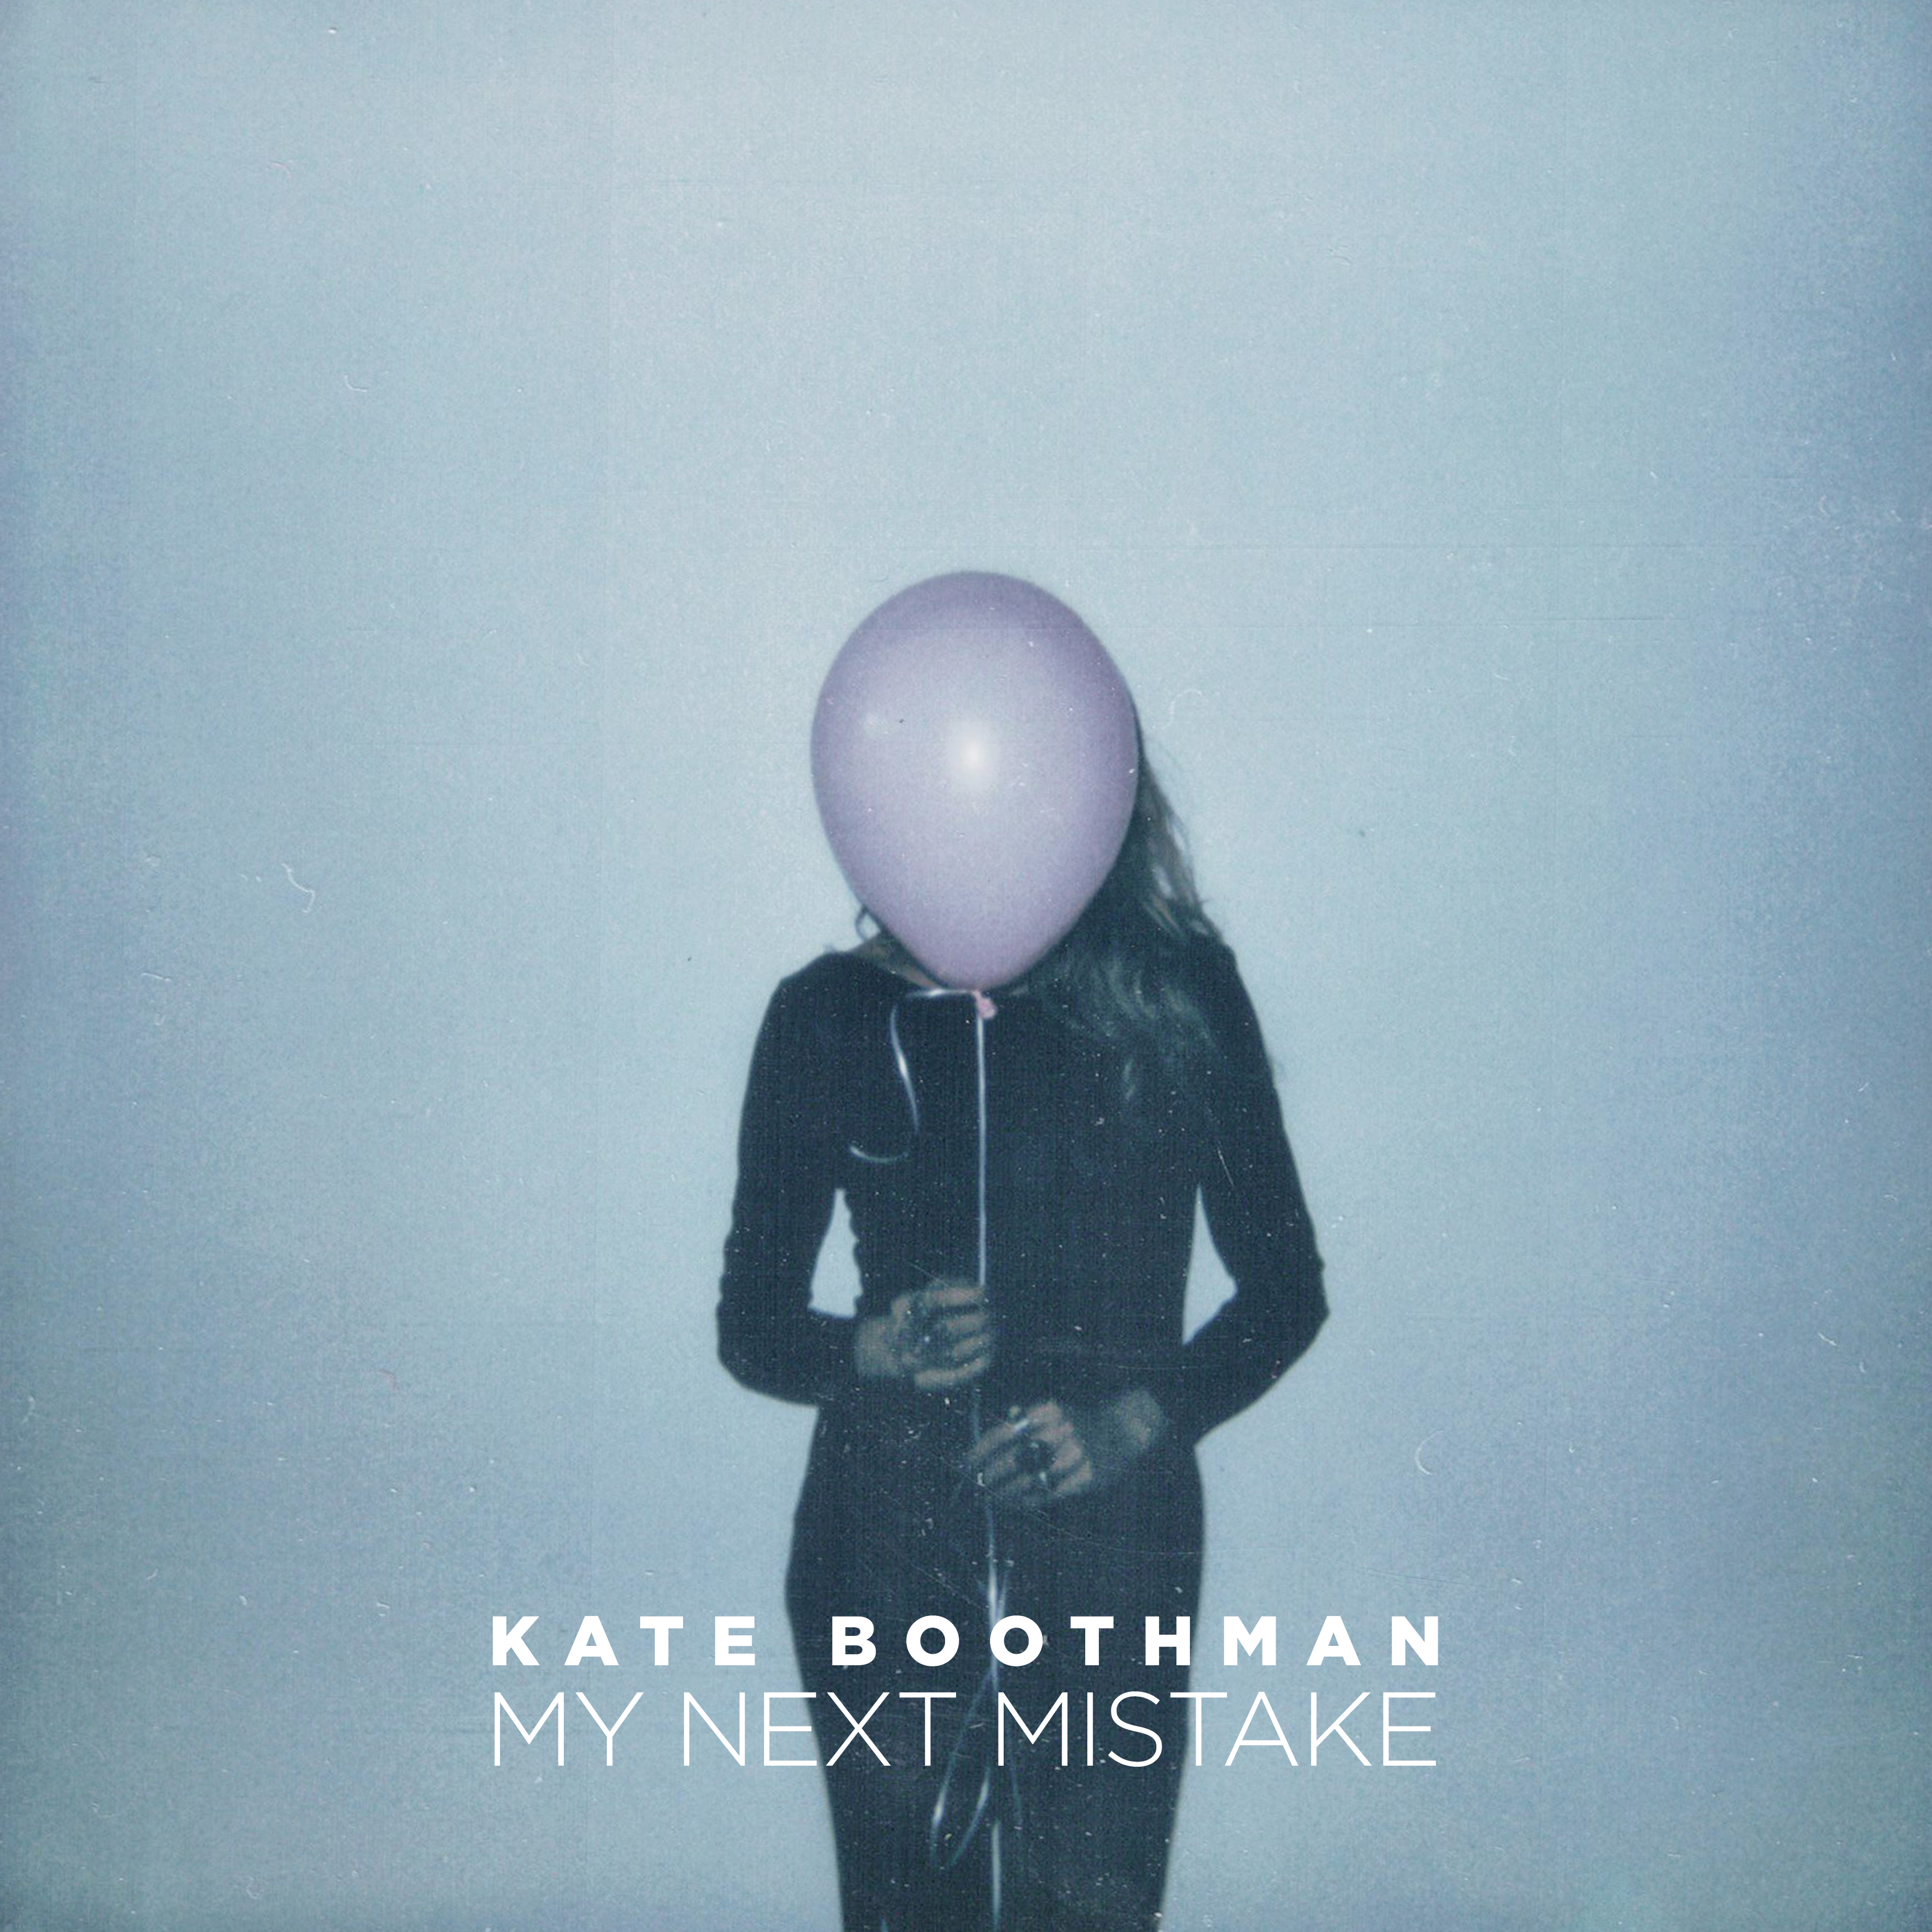 Kate Boothman is Pioneering a New Sub-Genre on Her Album, My Next Mistake